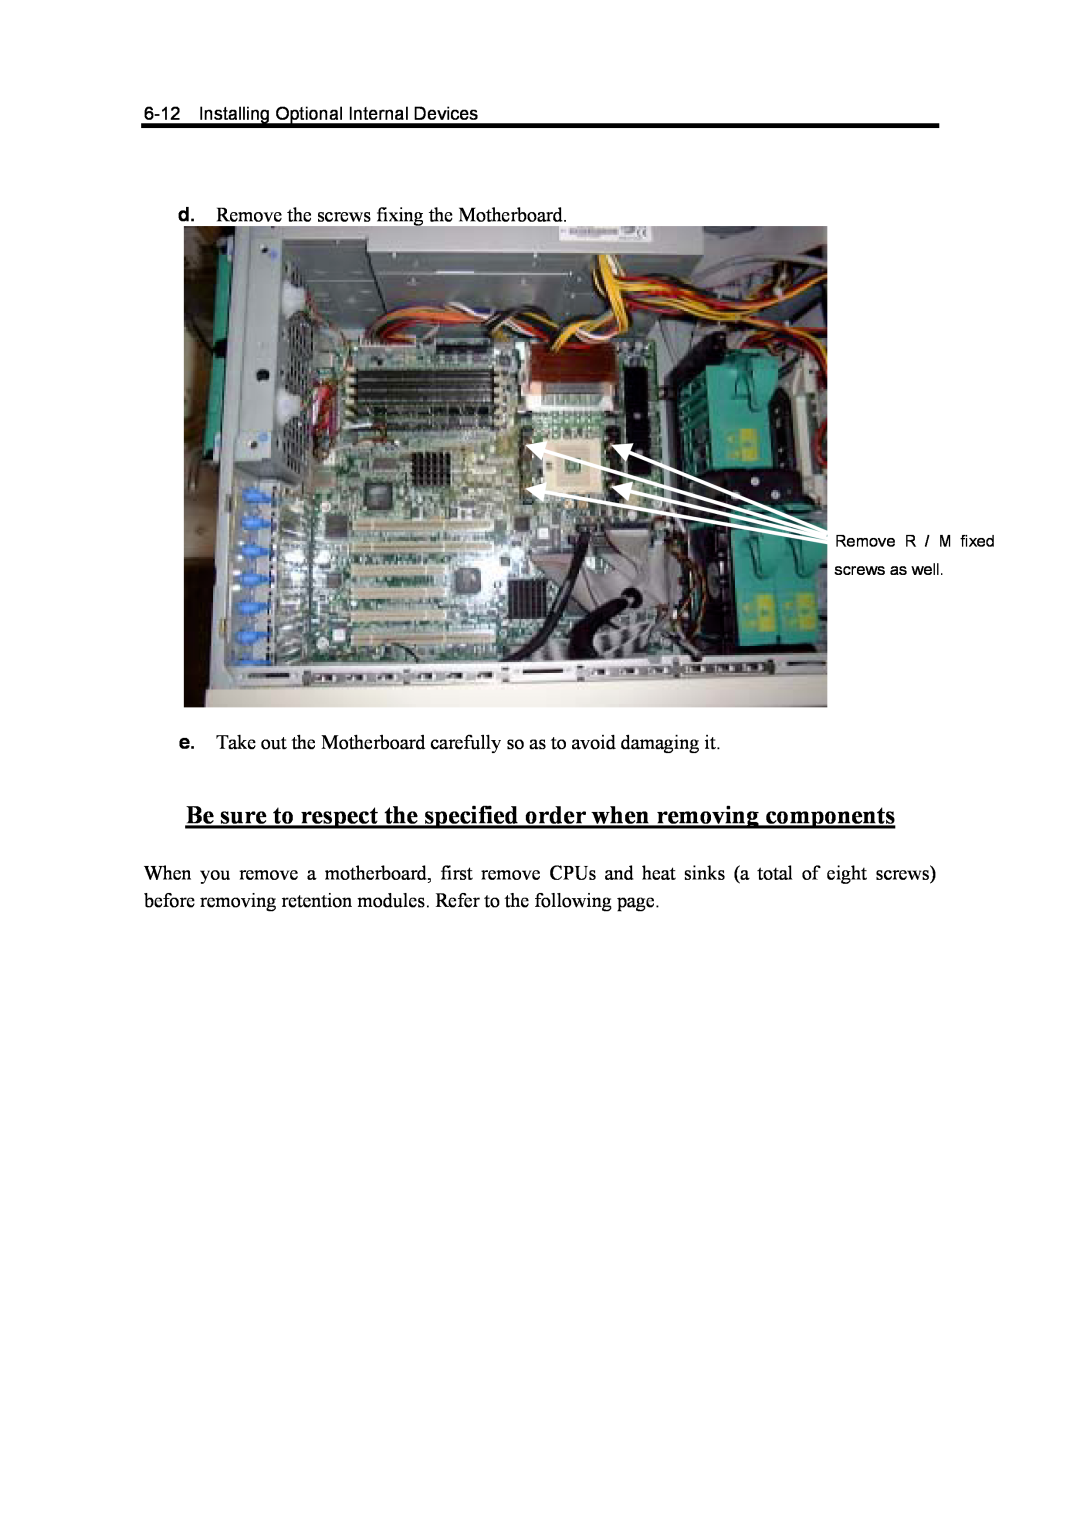 NEC 5800 Be sure to respect the specified order when removing components, d. Remove the screws fixing the Motherboard 